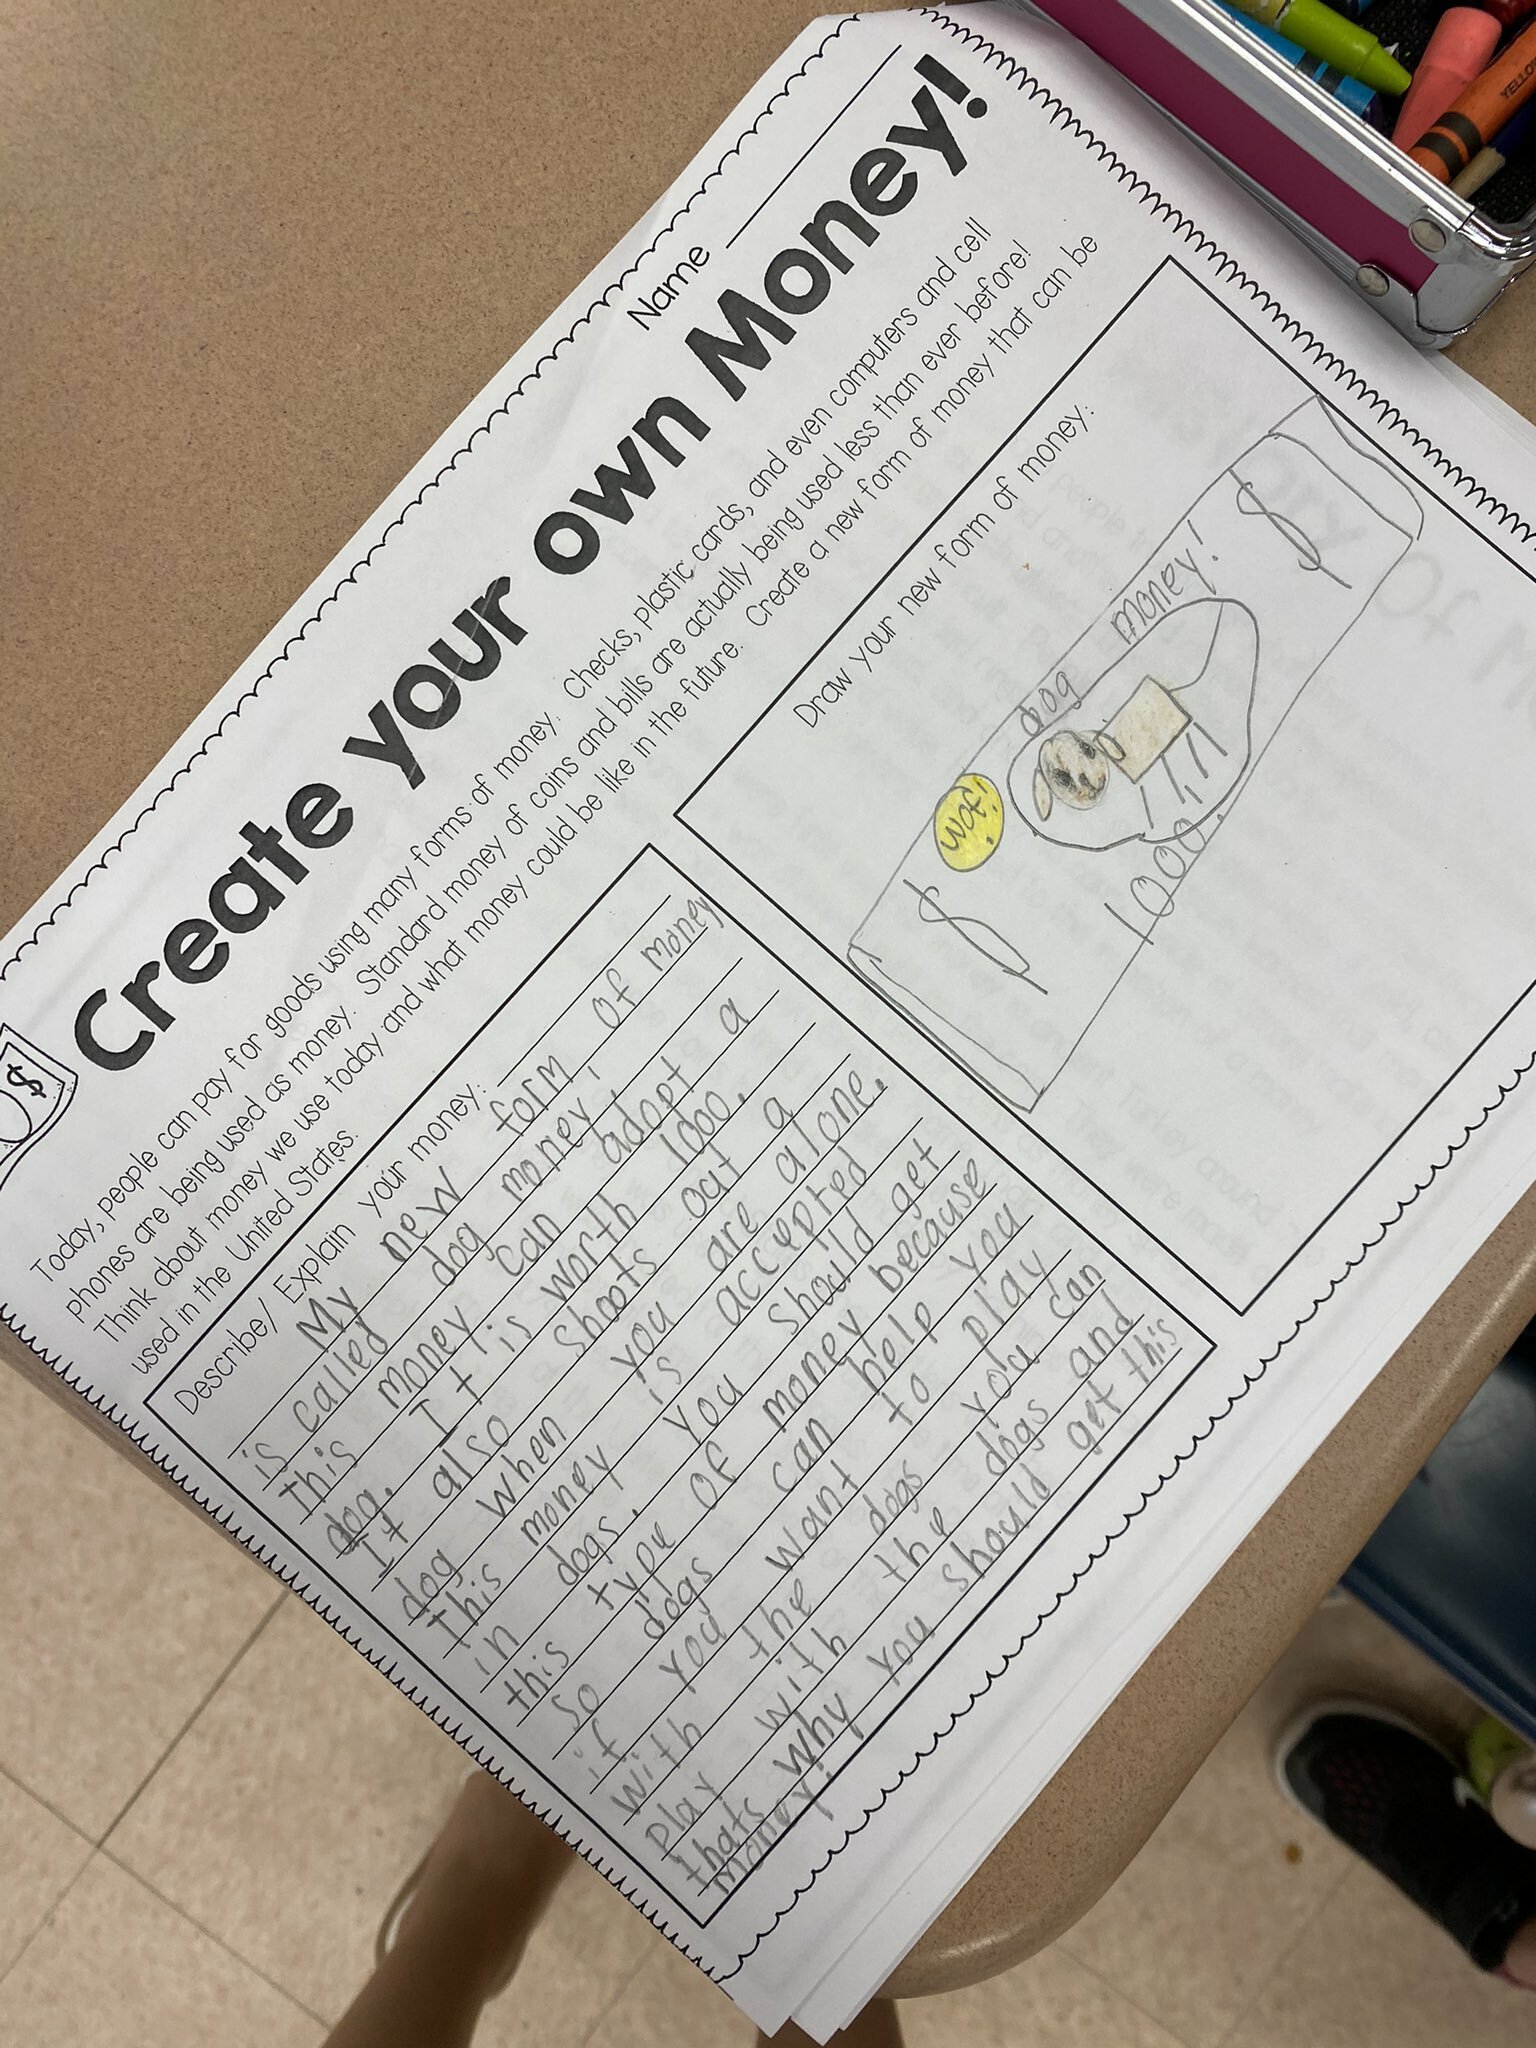 Claire Urizzo’s third grade class at Hampton Bays Elementary School recently learned about the U.S. economy and the history of money. They culminated the lesson by designing their own money and writing about how it can be used. They imagined their own dog money, unicorn money and even chocolate money.